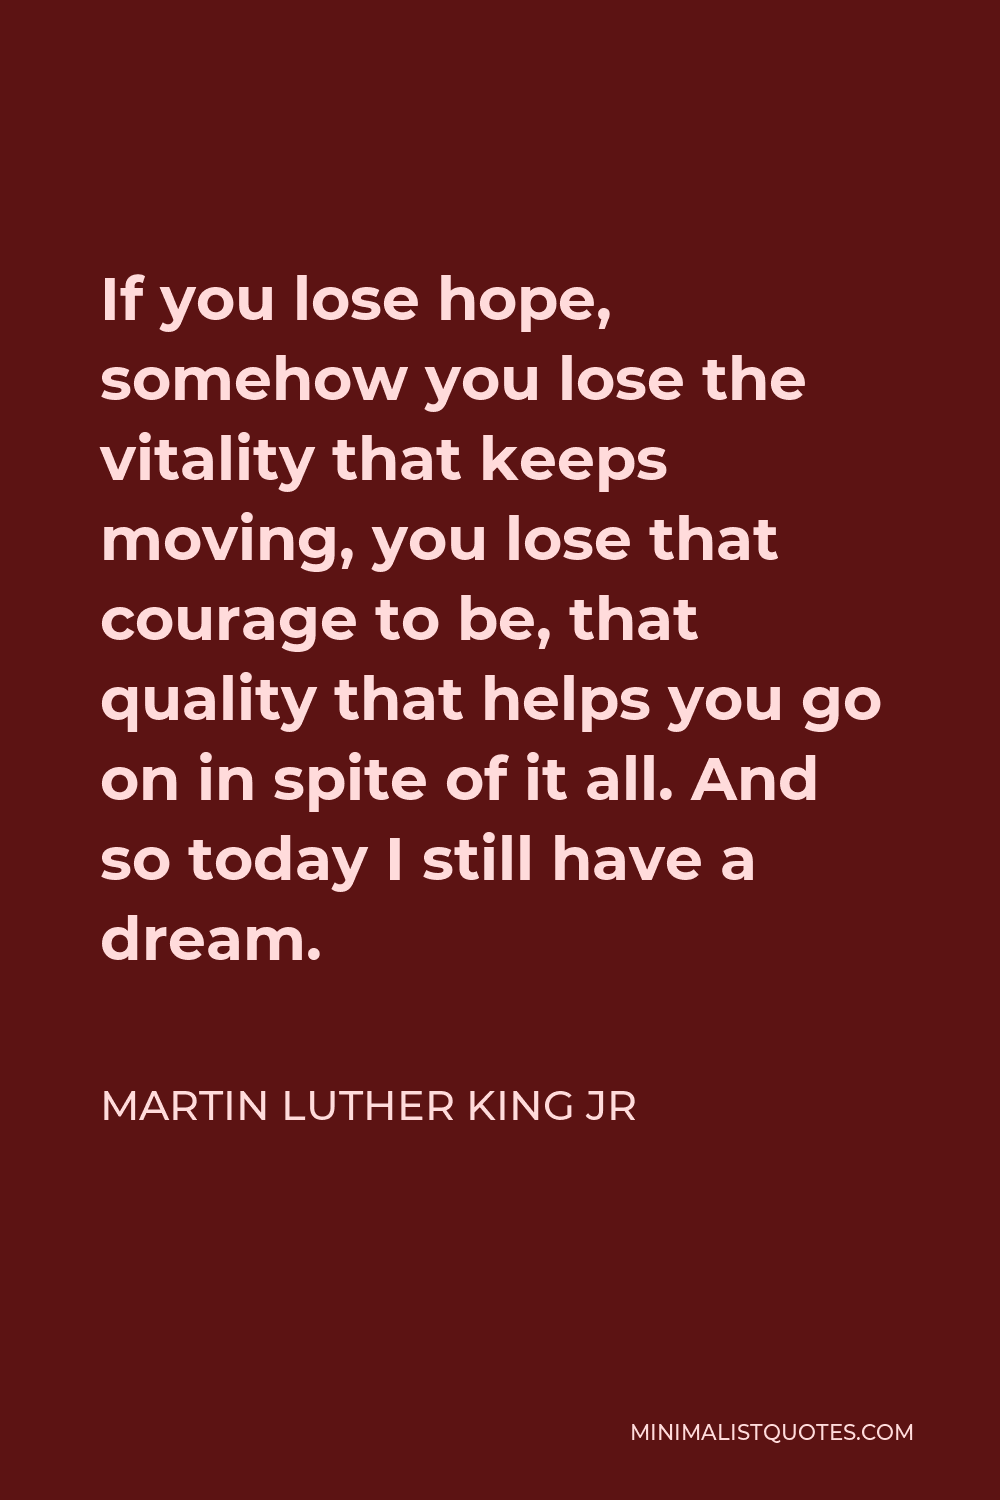 Martin Luther King Jr Quote - If you lose hope, somehow you lose the vitality that keeps moving, you lose that courage to be, that quality that helps you go on in spite of it all. And so today I still have a dream.